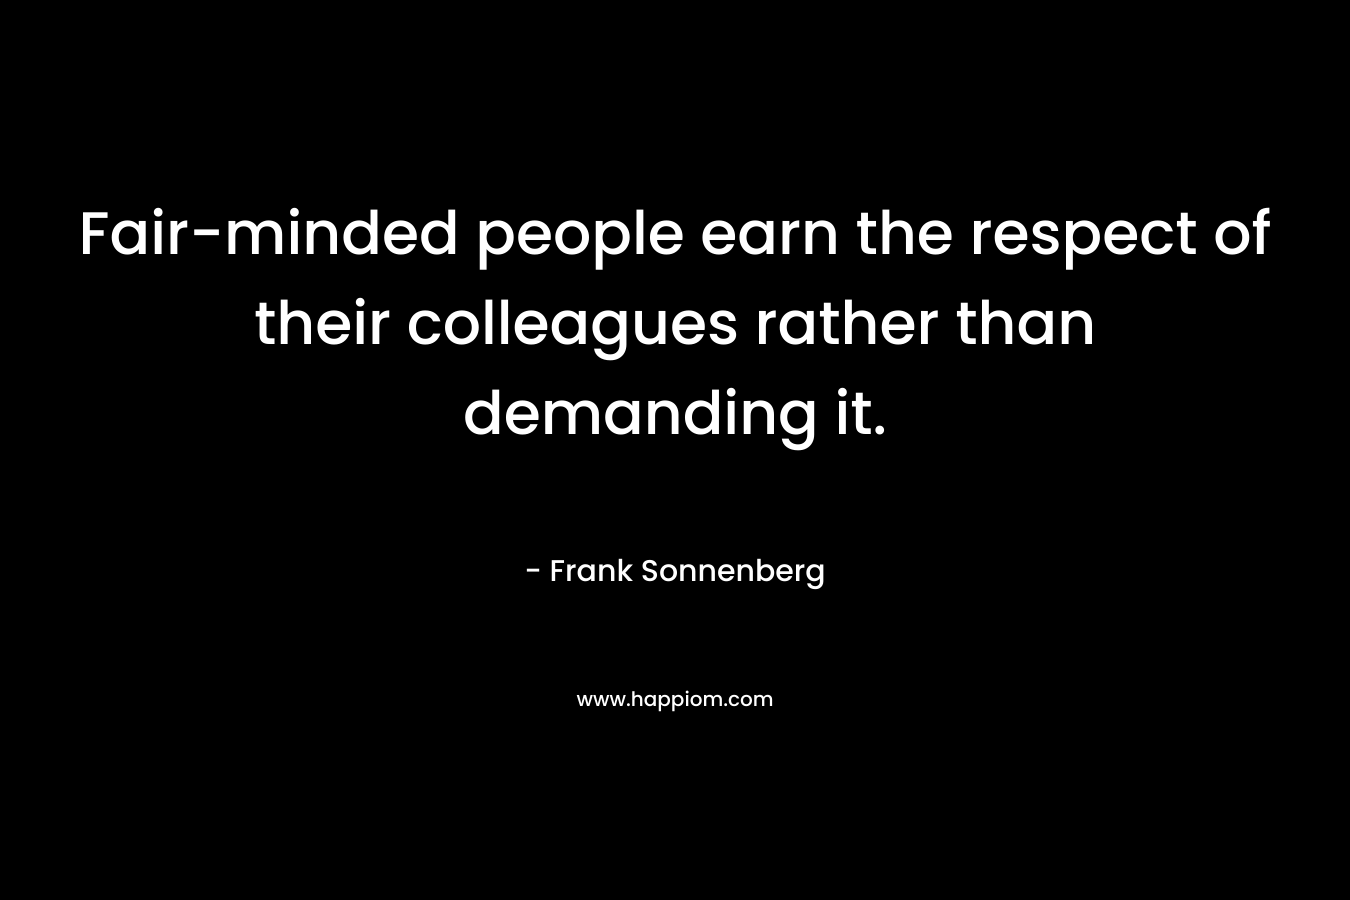 Fair-minded people earn the respect of their colleagues rather than demanding it. – Frank Sonnenberg